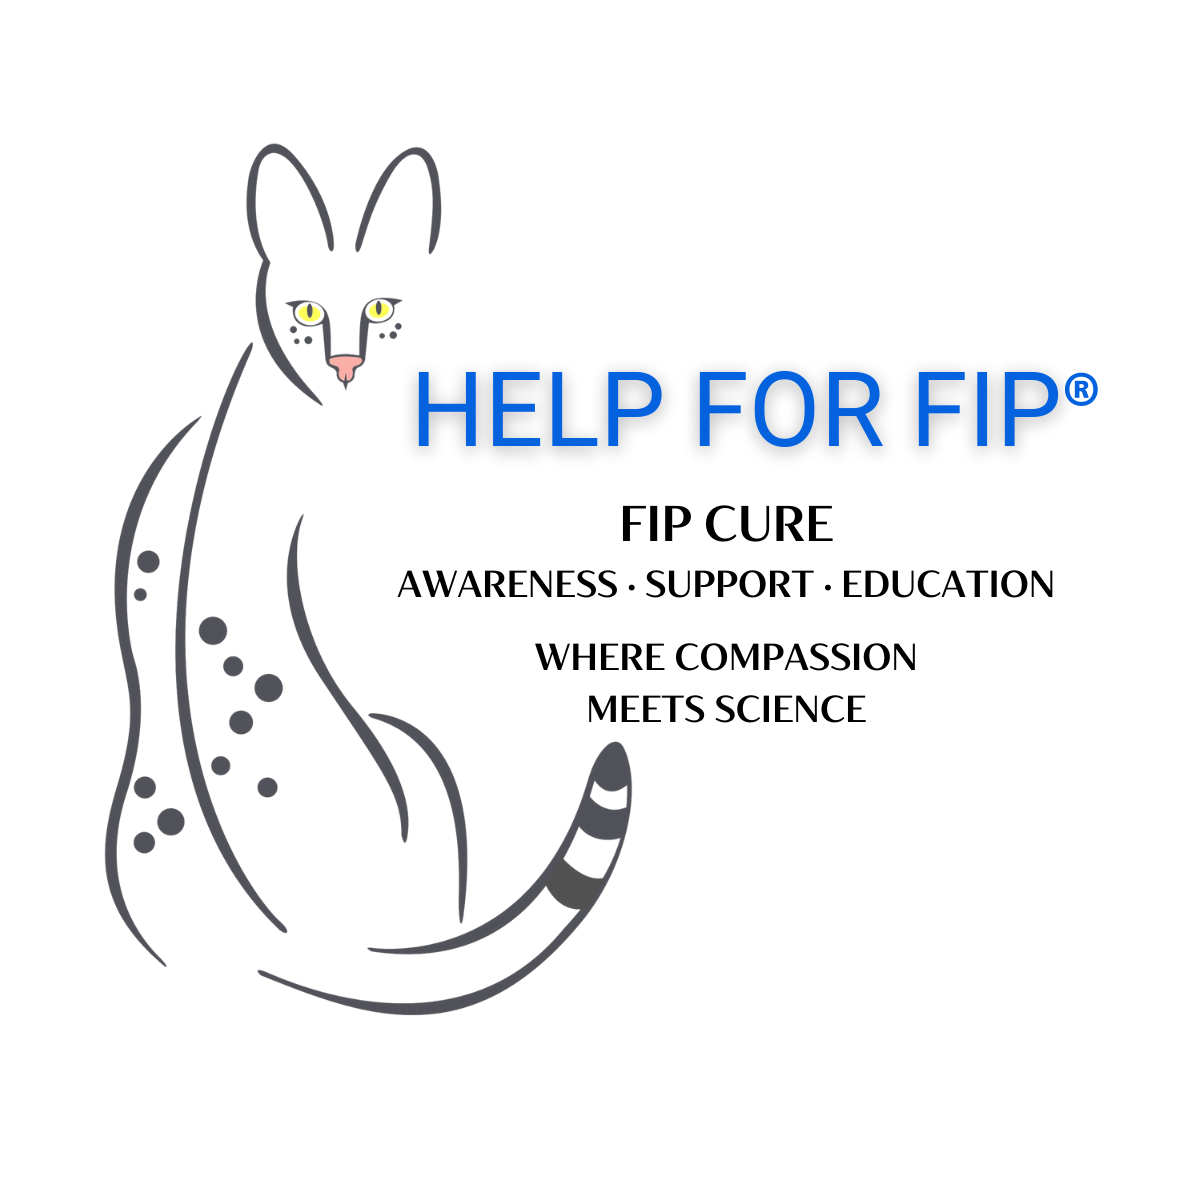 HELP FOR FIP by Lunas FIP Legacy LLC